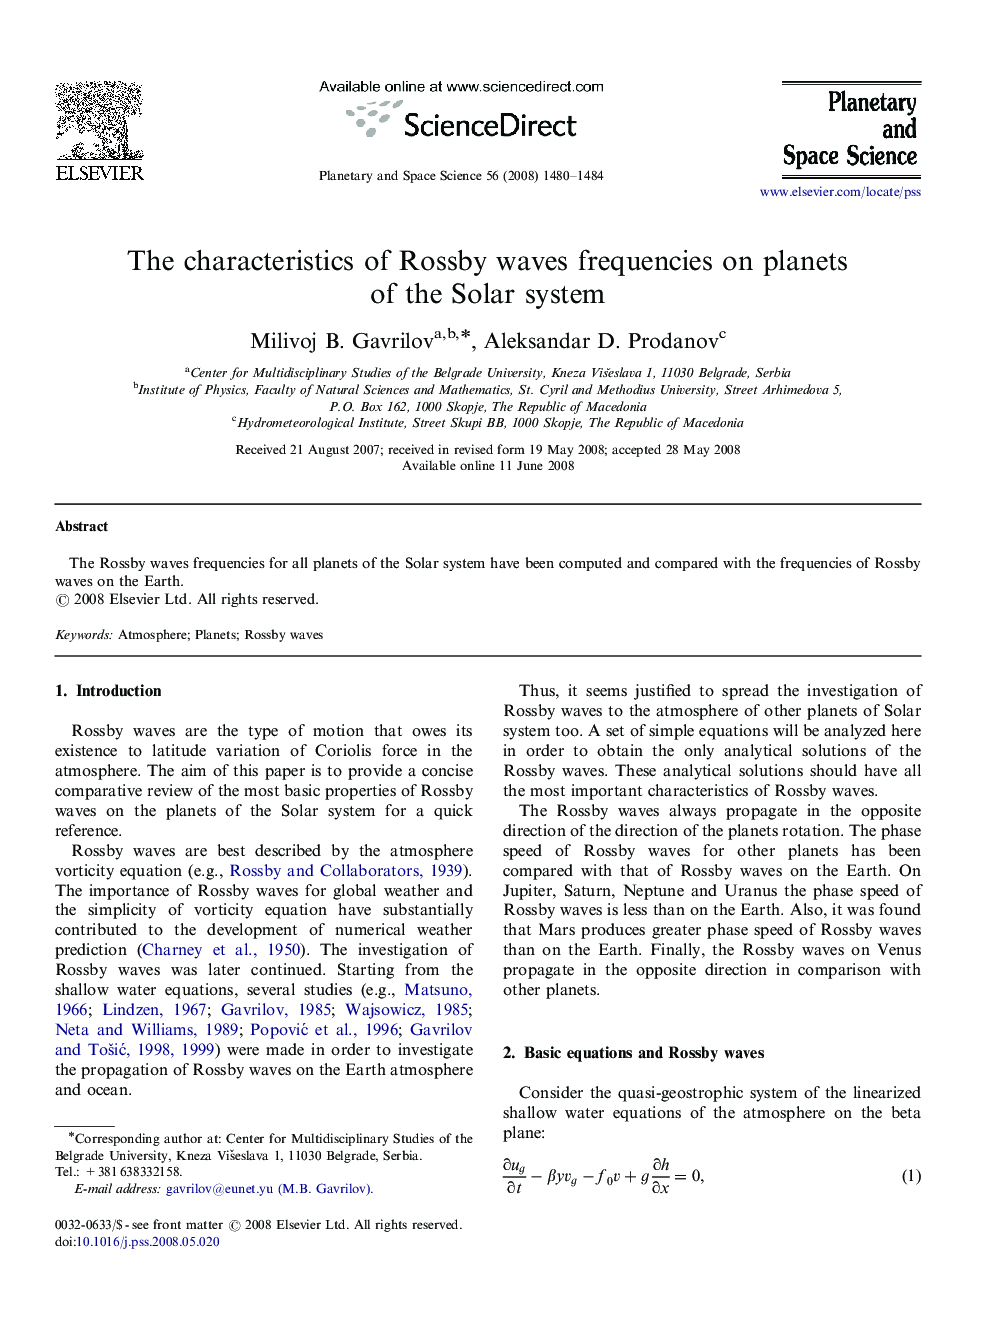 The characteristics of Rossby waves frequencies on planets of the Solar system